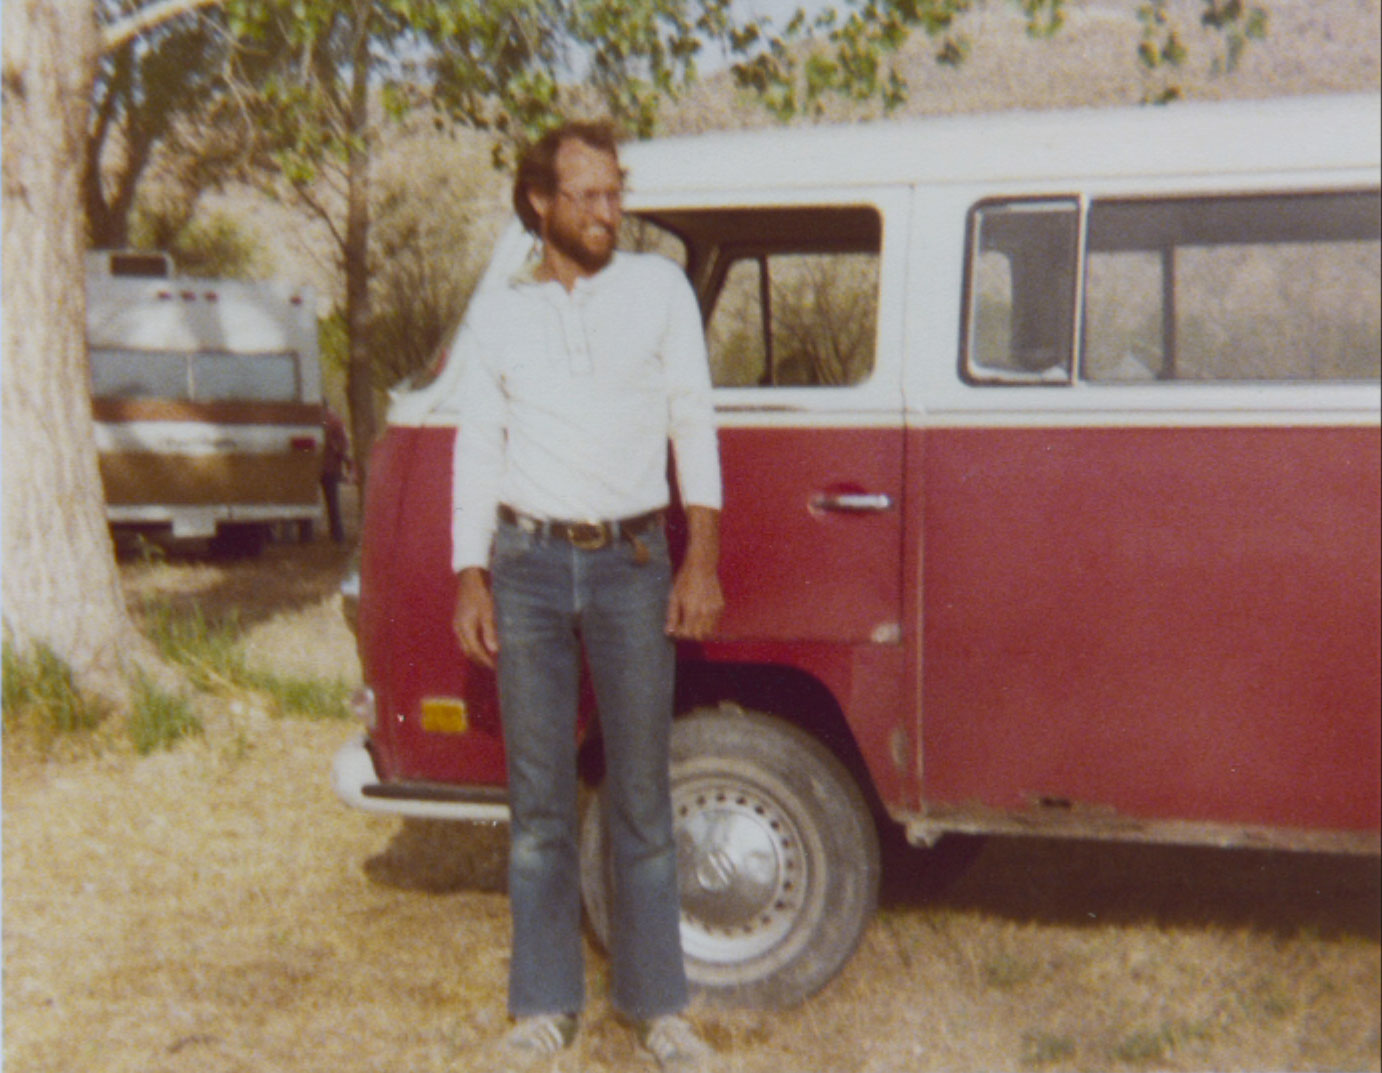 Phil Sterzing, 1970 (Phil Sterzing Collection)